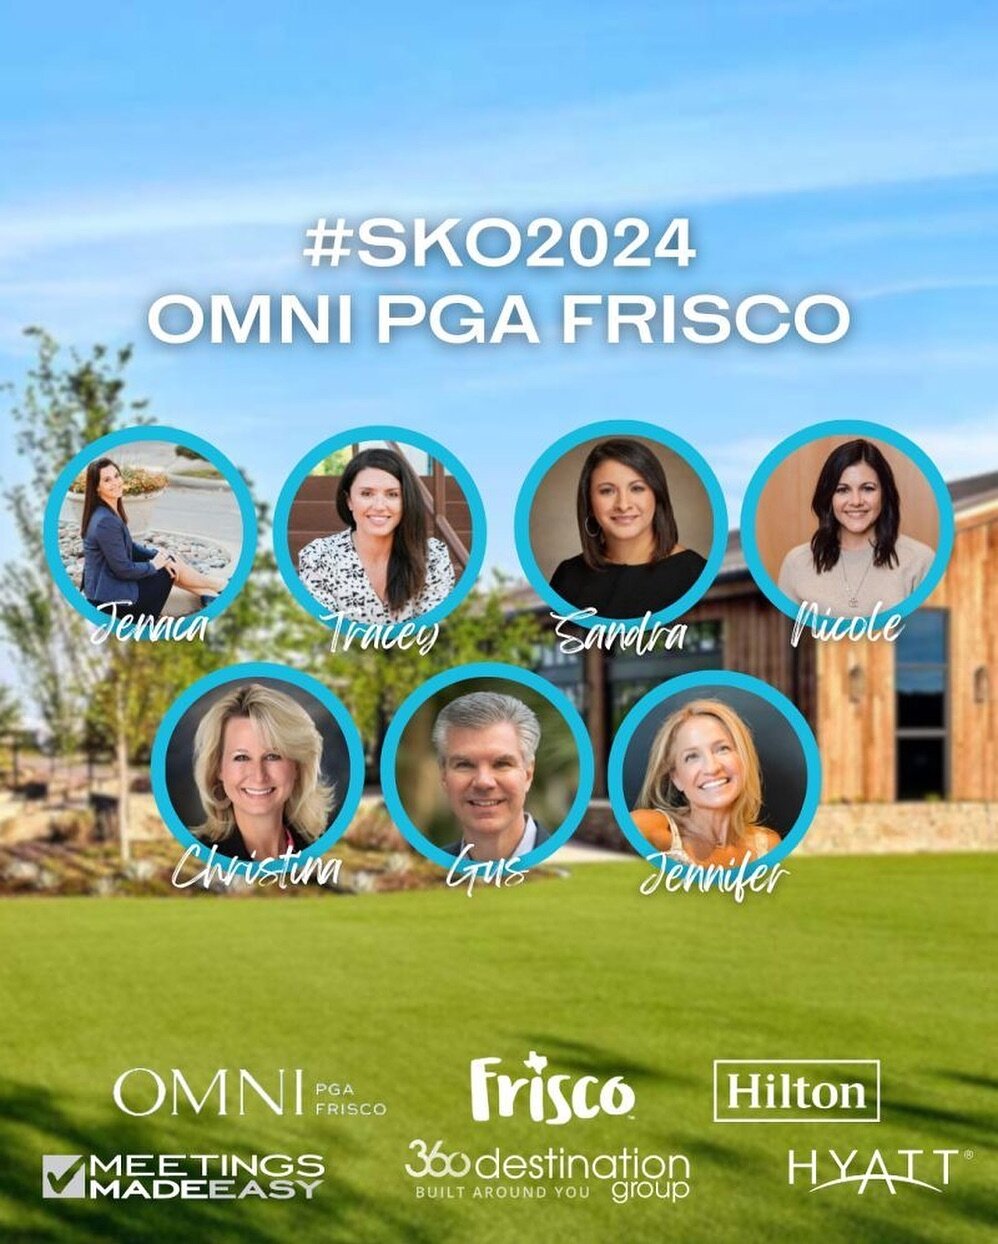 The countdown has begun! In just 7 days our team is heading to Omni PGA Frisco Resort for SKO2024 🔥

We can&rsquo;t wait to get our incredible Meeting Brokers together to prepare for a successful 2024.

A huge thank you to our incredible partners fo